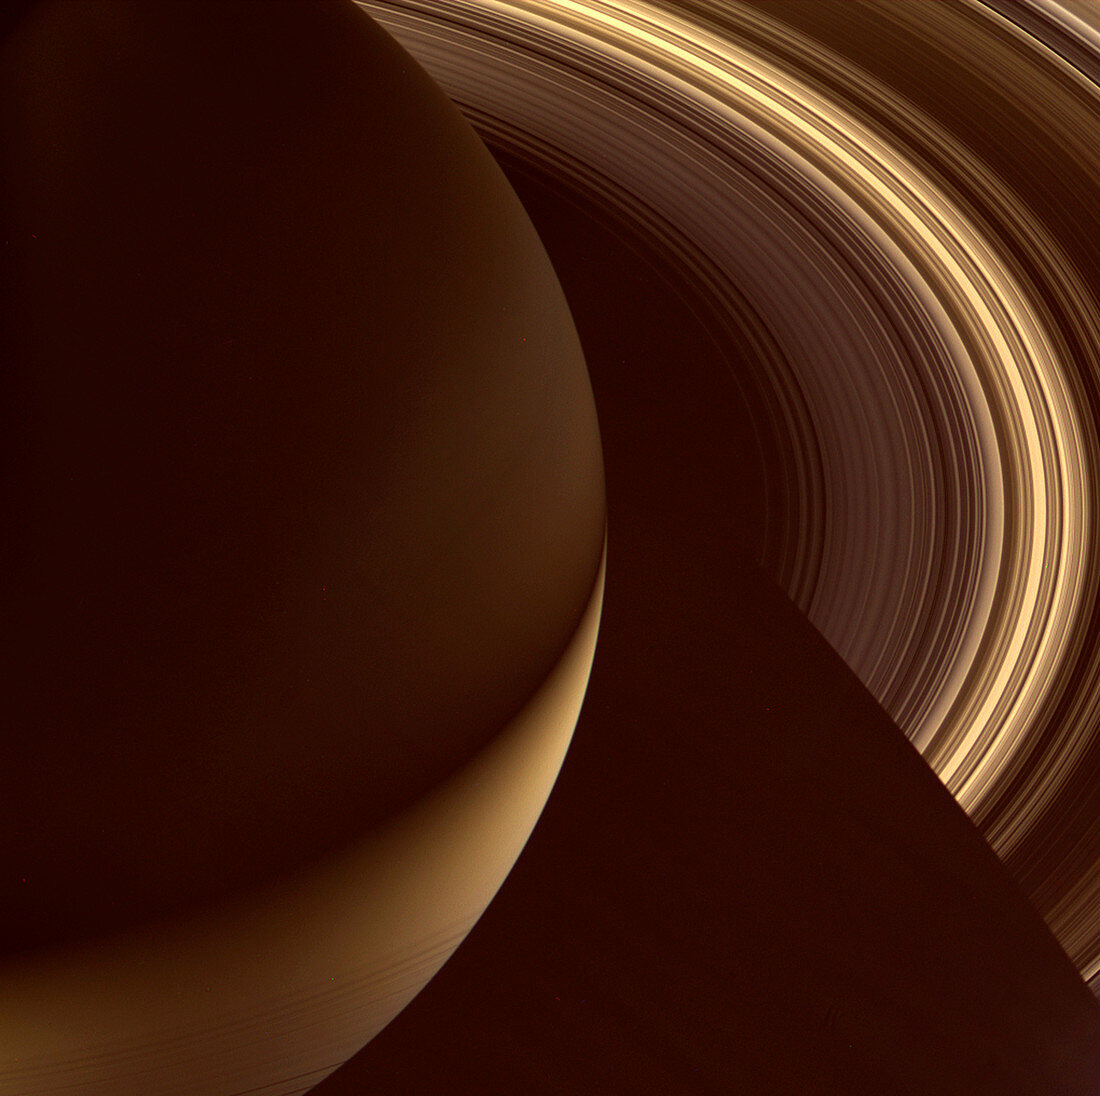 Saturn and its rings,Cassini image